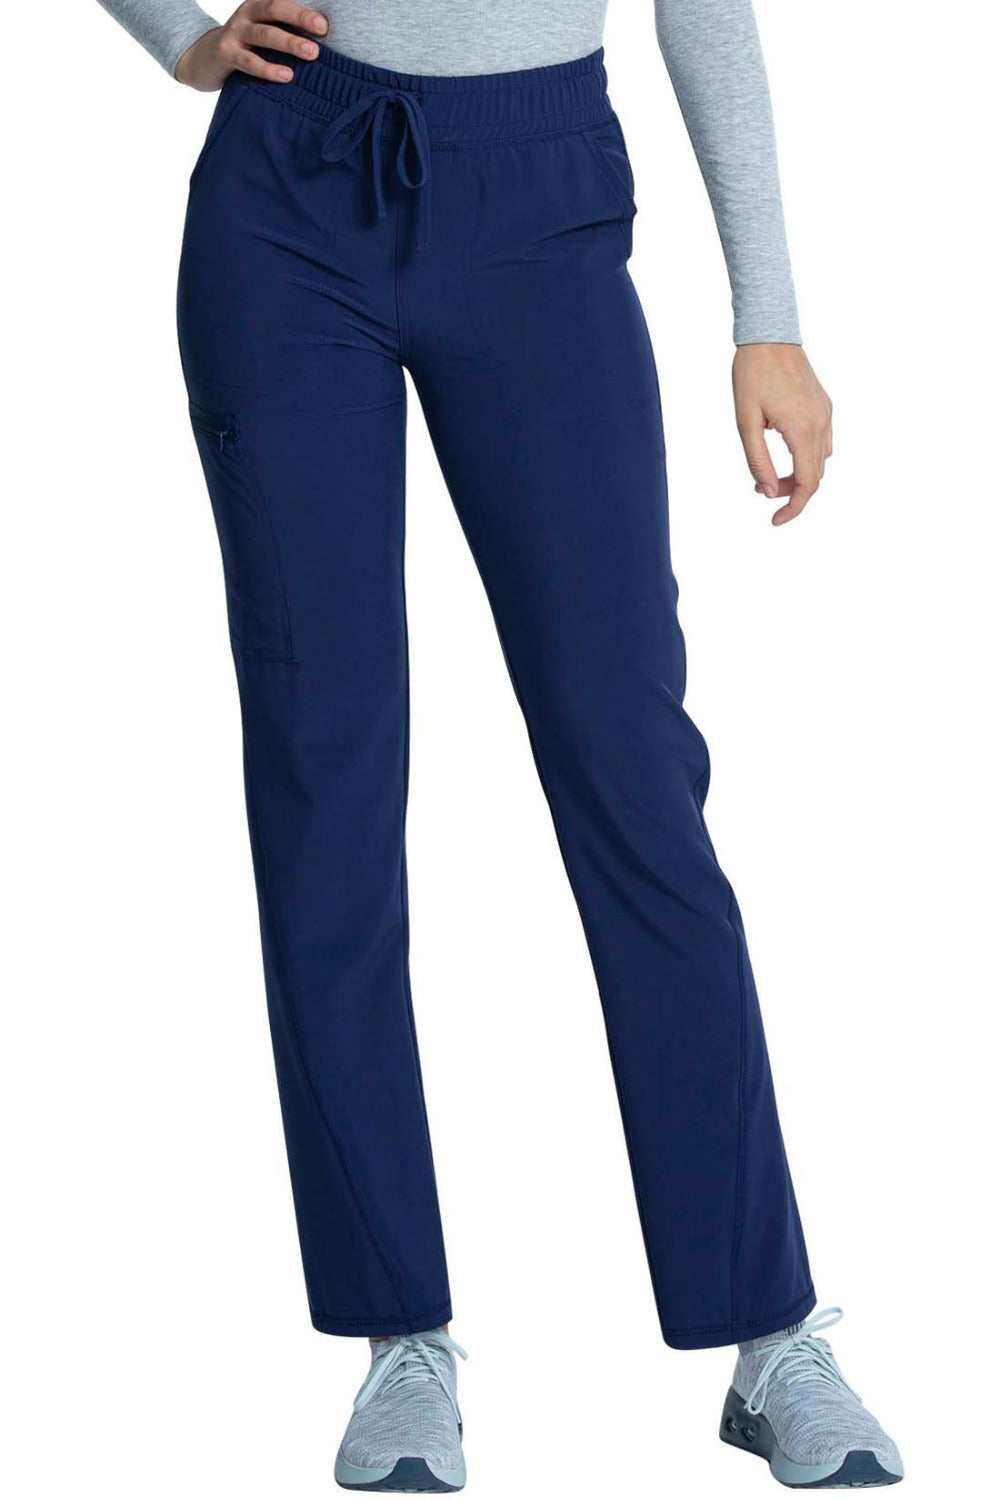 Cherokee Allura Scrub Pant Mid Rise Tapered Leg Drawstring in Navy at Parker's Clothing and Shoes.